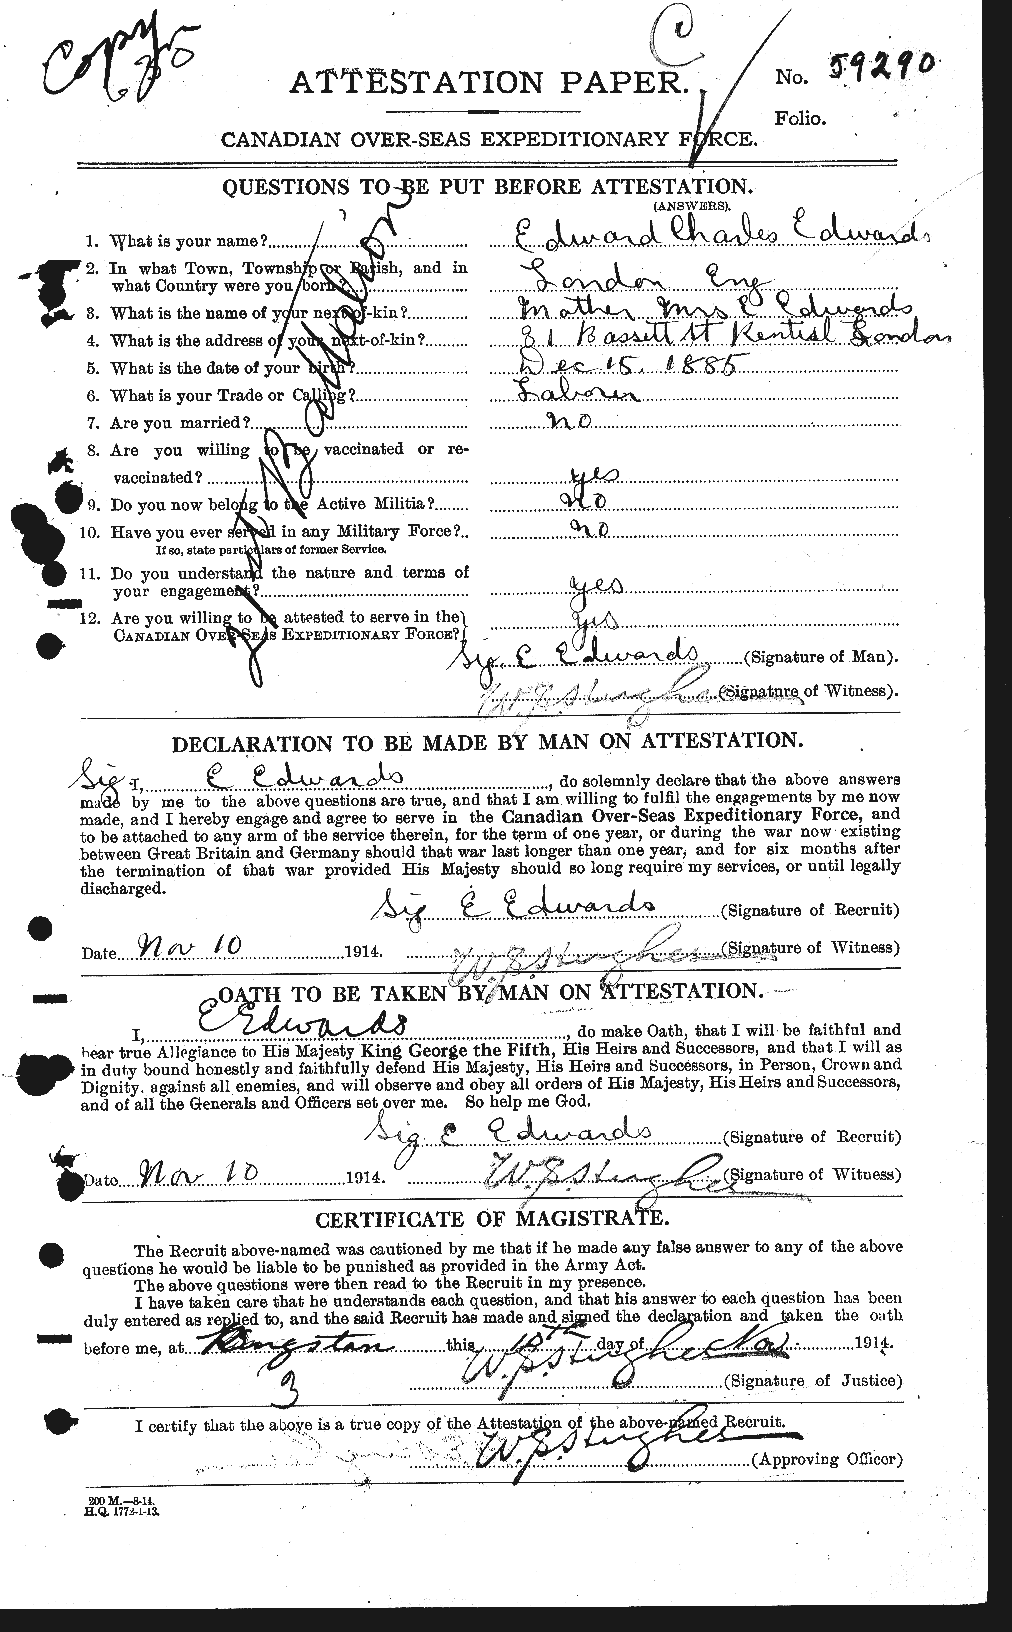 Personnel Records of the First World War - CEF 307901a